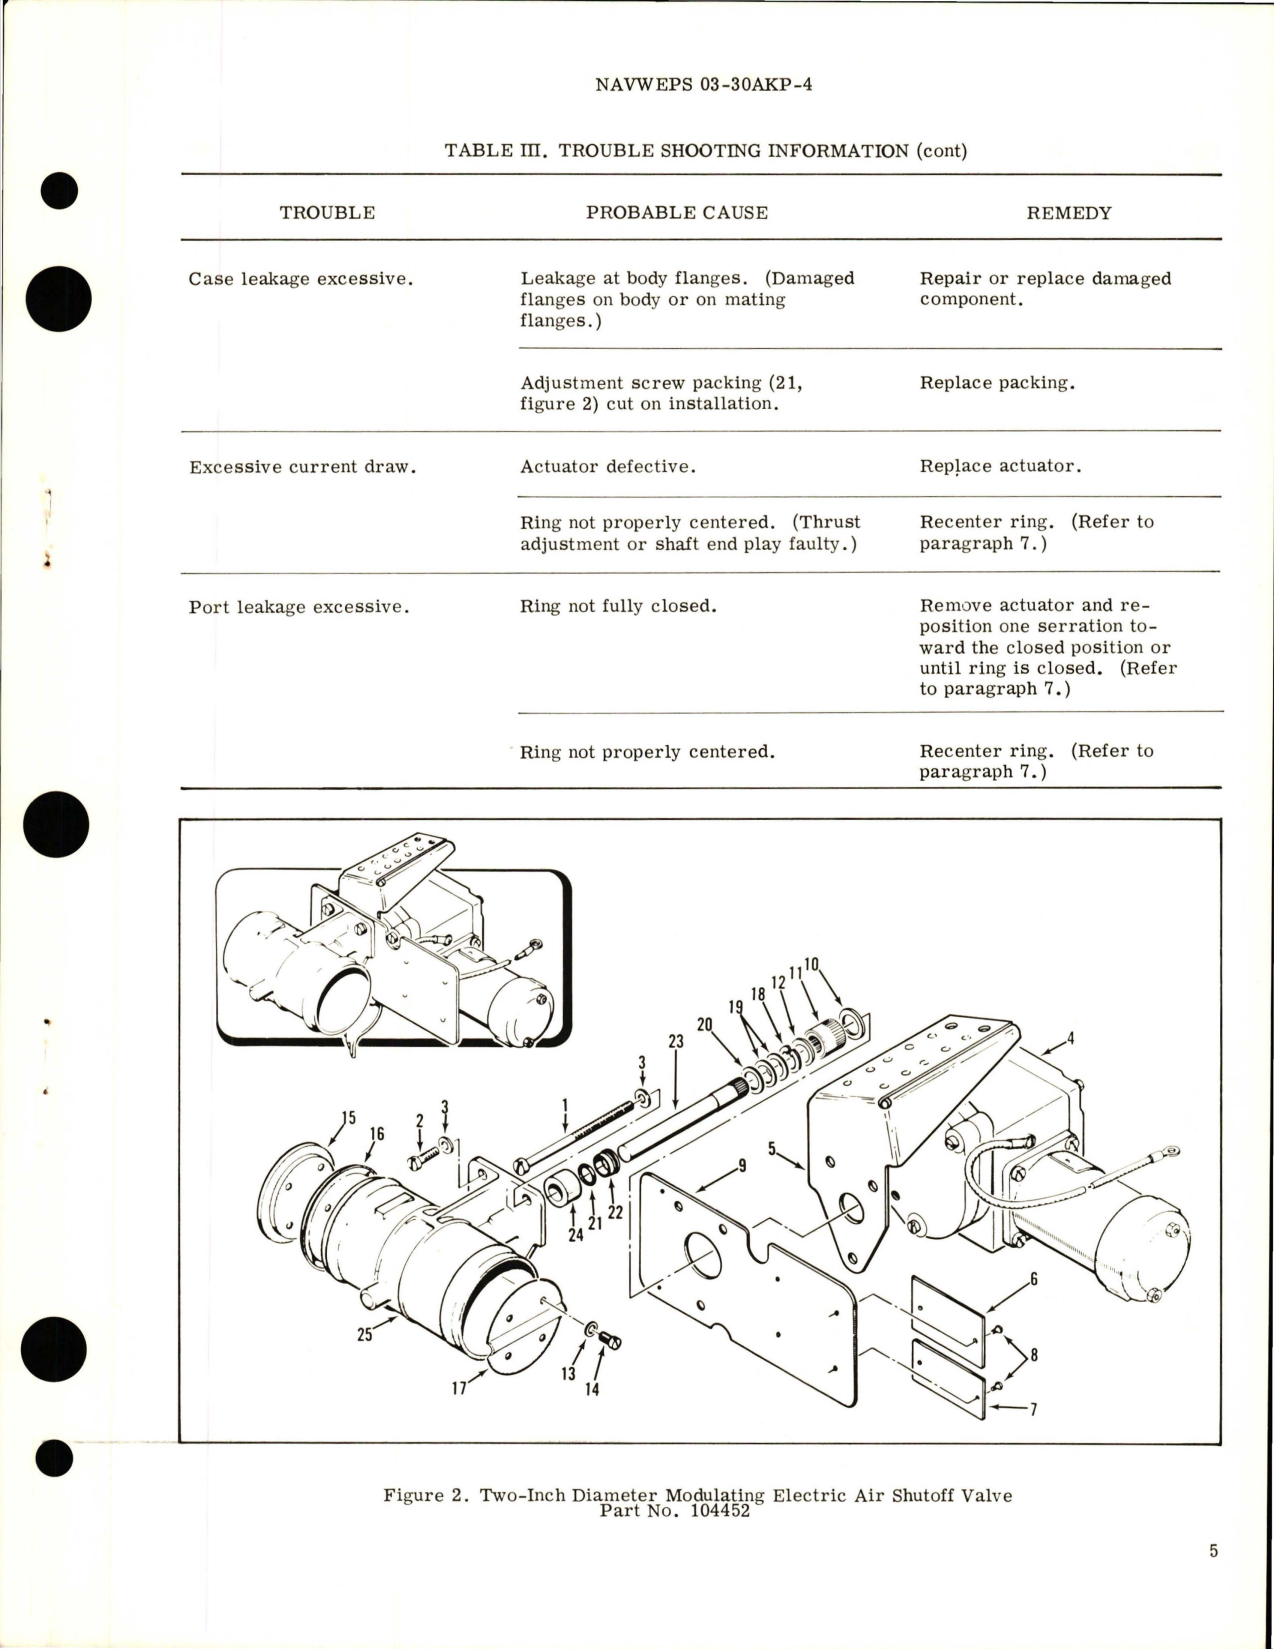 Sample page 5 from AirCorps Library document: Overhaul Instructions with Parts Breakdown for Modulating Electric Air Shutoff Valve - Two Inch Diameter - Part 104452 - Model SVE1-119-1